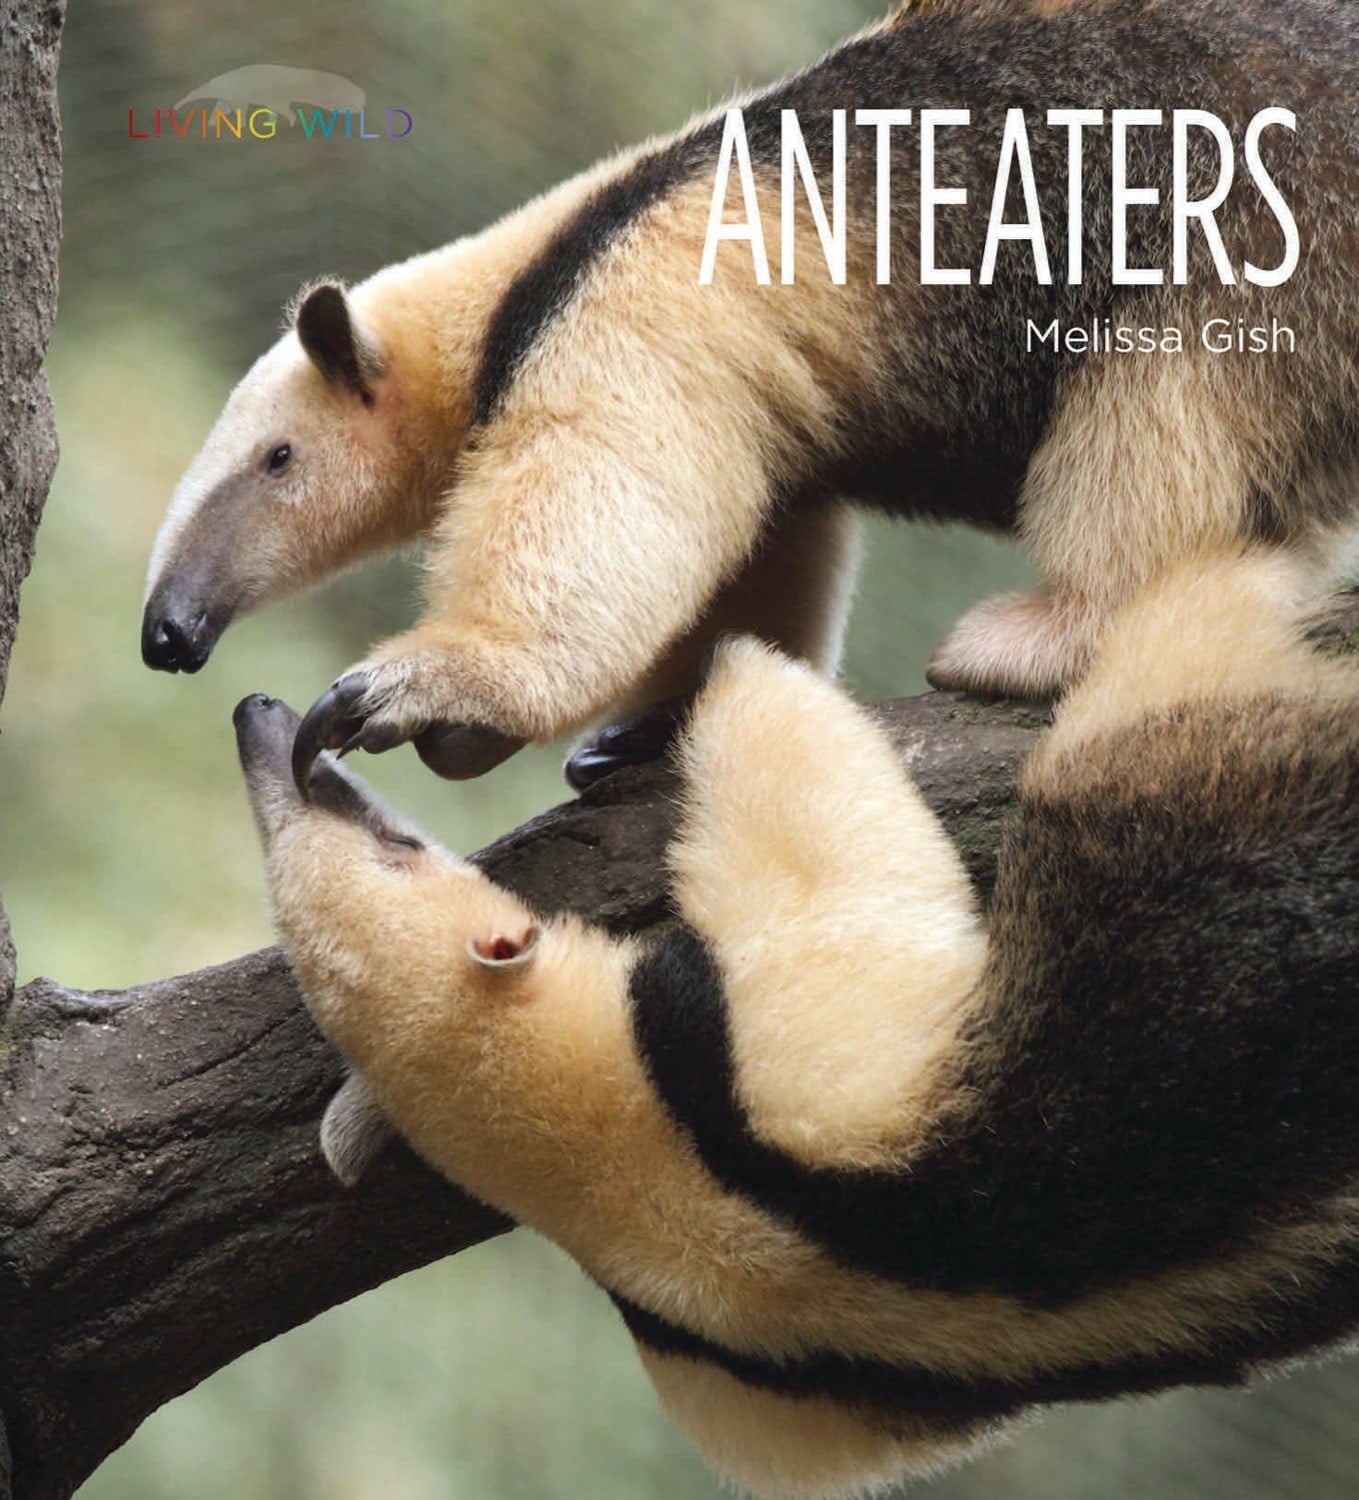 Living Wild - Classic Edition: Anteaters